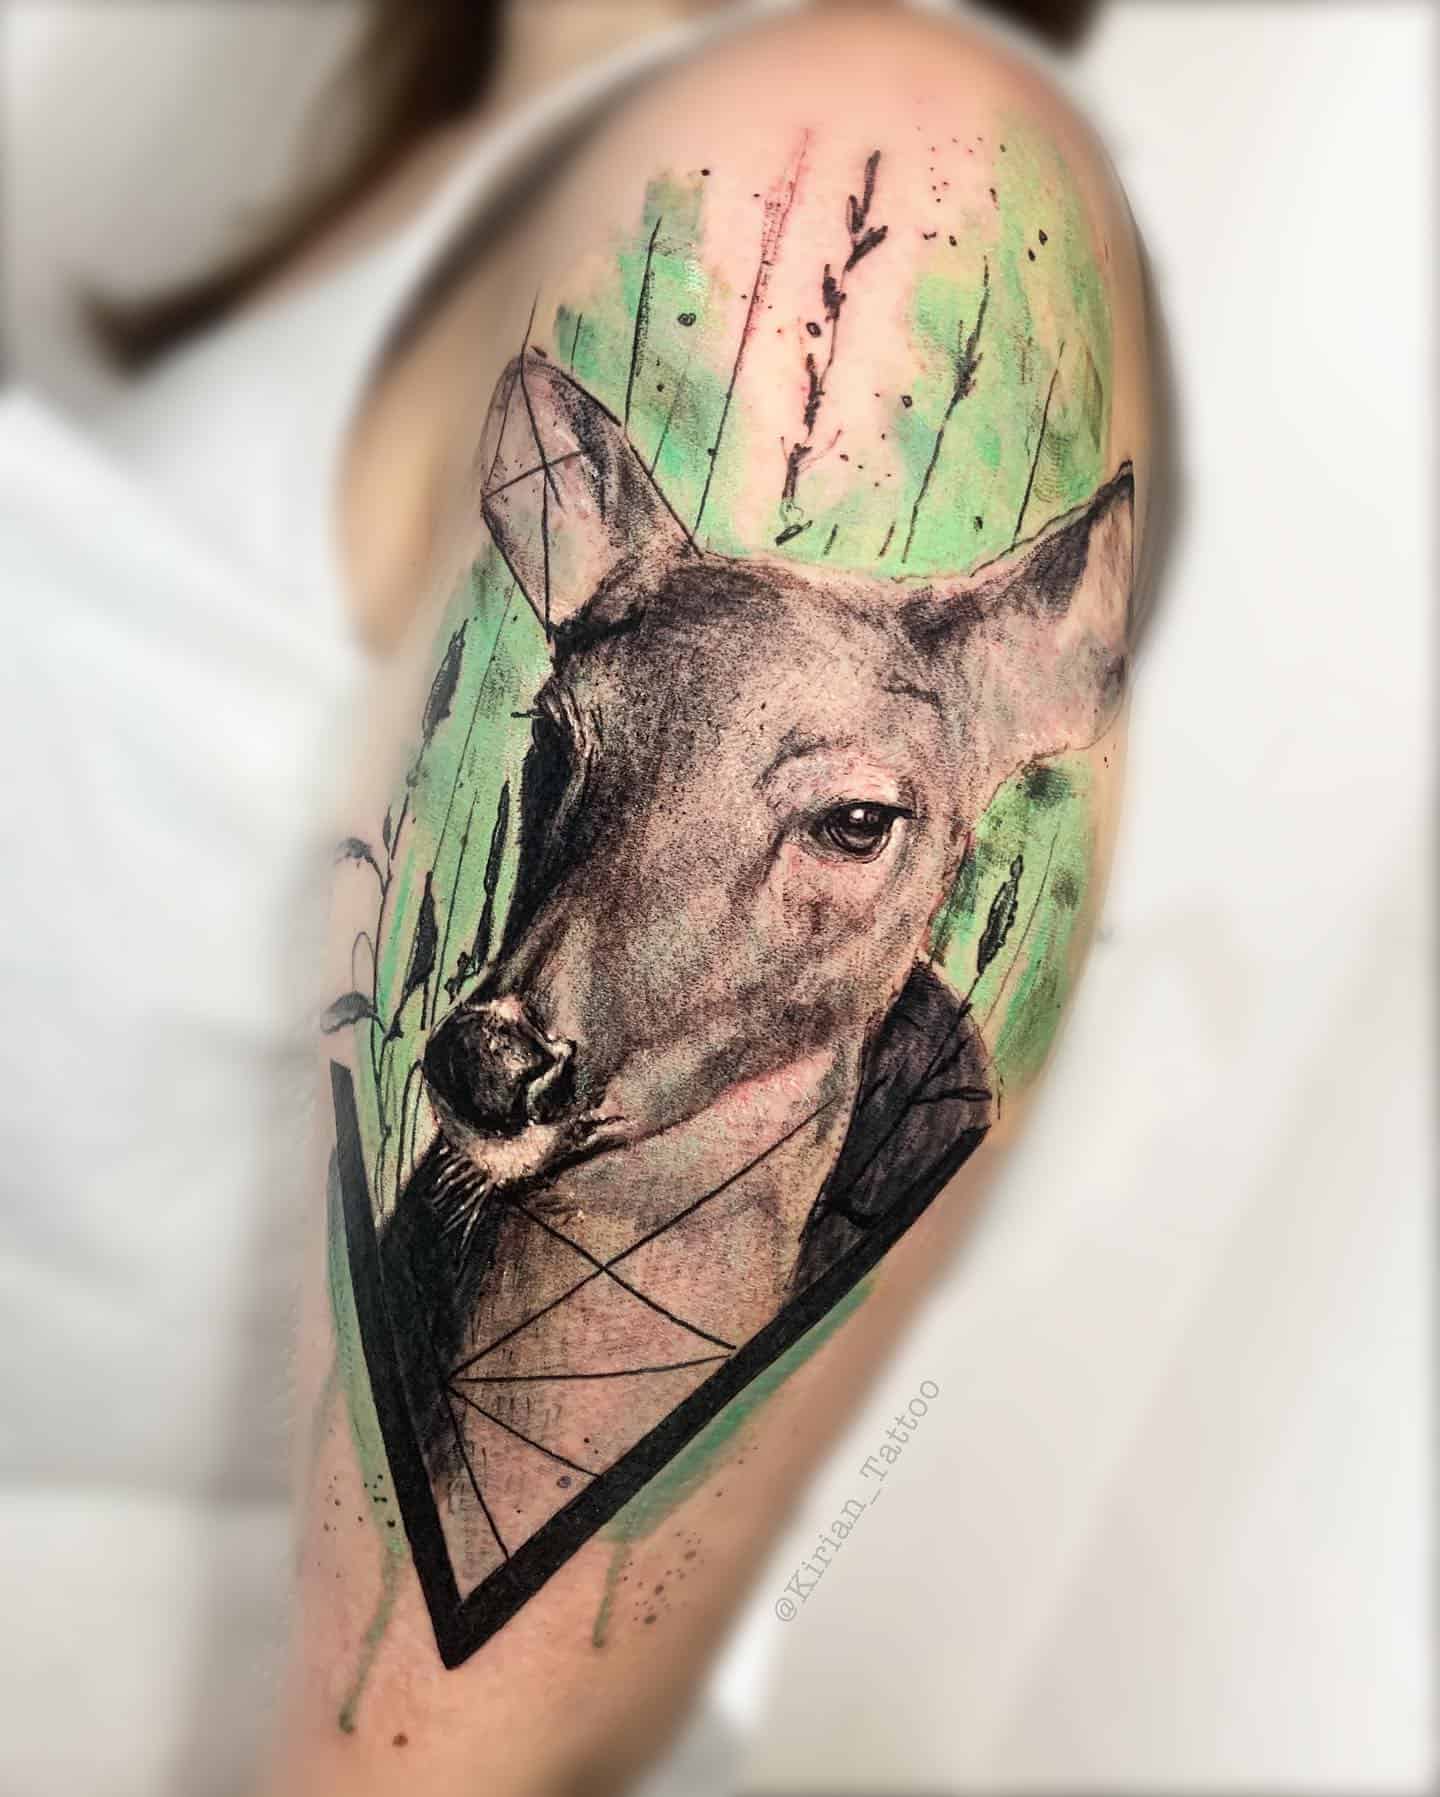 125 Captivating Deer Tattoo Designs  Meanings  Tattoo Me Now